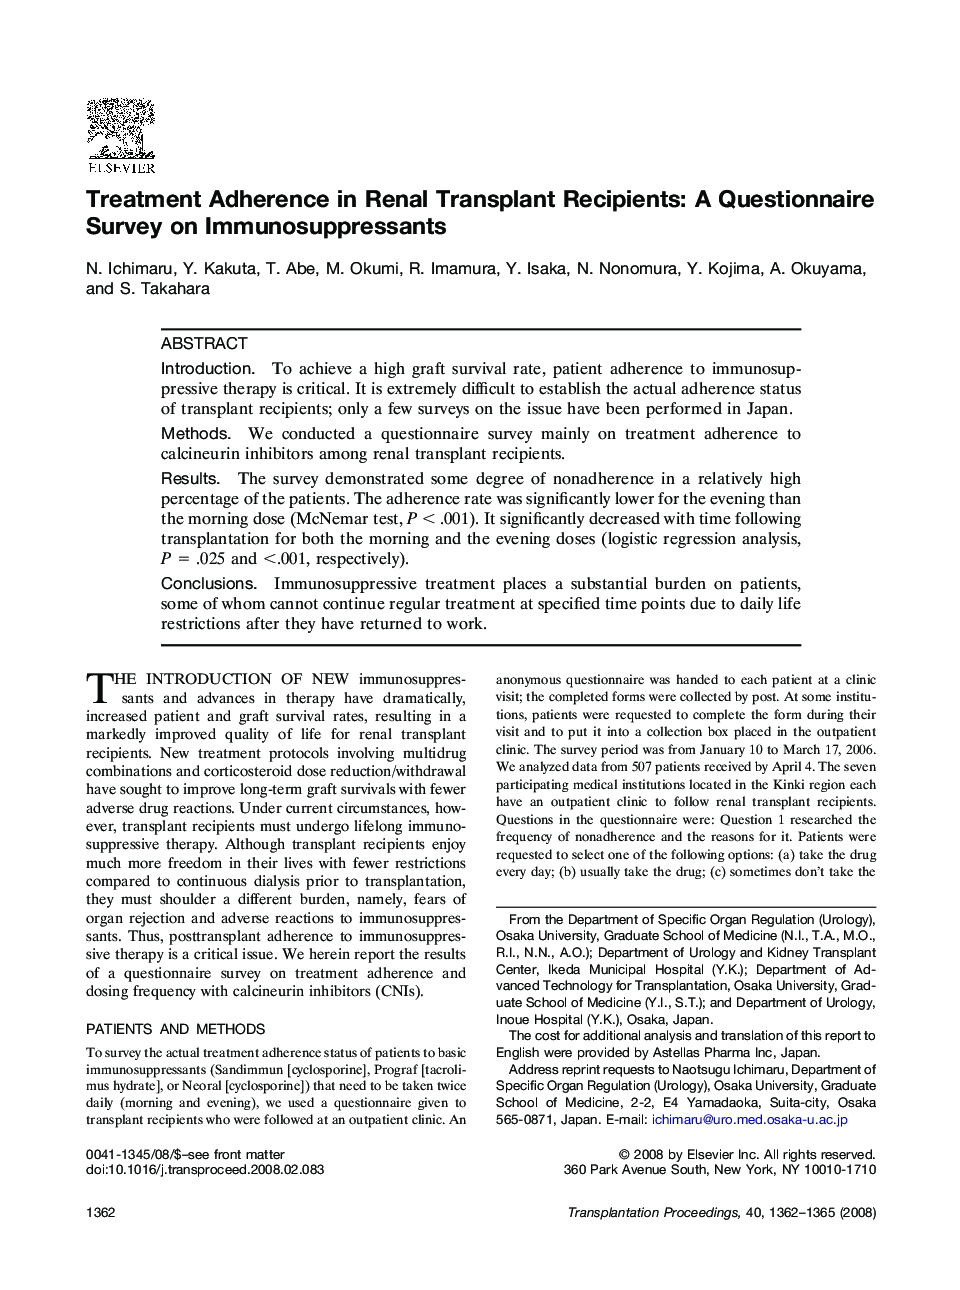 Treatment Adherence in Renal Transplant Recipients: A Questionnaire Survey on Immunosuppressants 